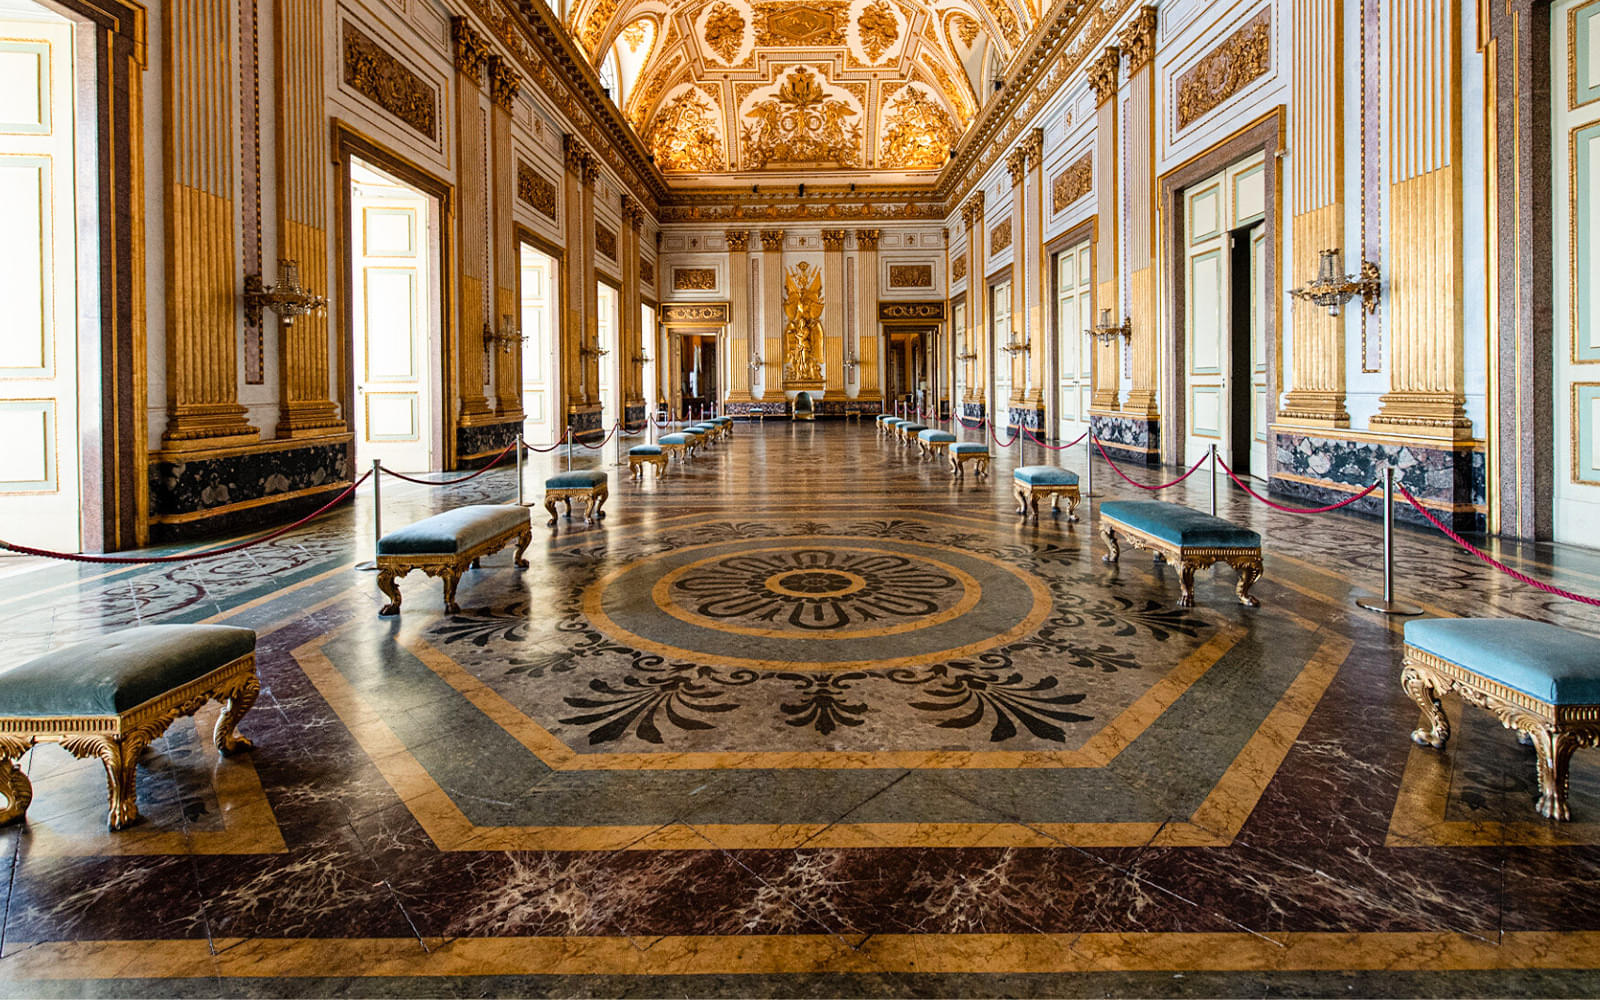 Admire the stunning Baroque architecture and furniture in the rooms of the palace